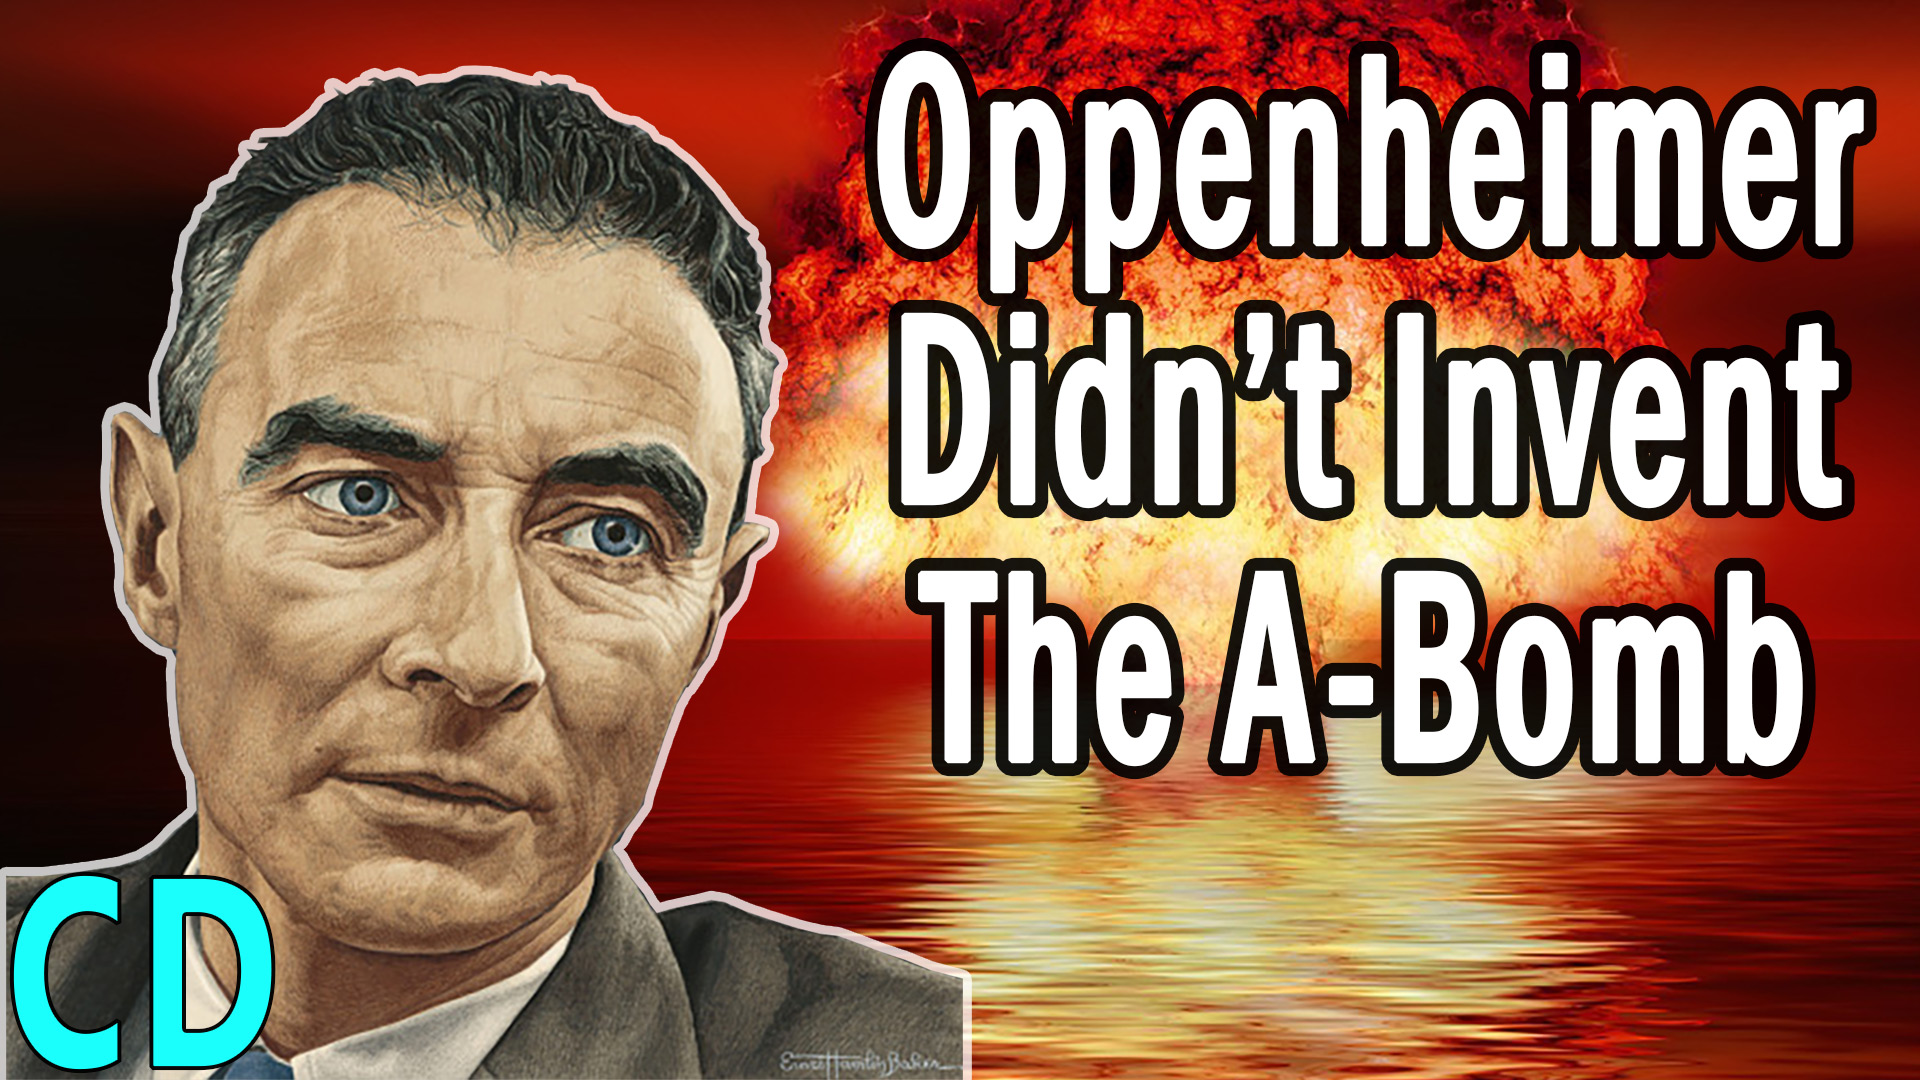 If Oppenheimer Didn’t Invent the Atomic Bomb, Who Did?